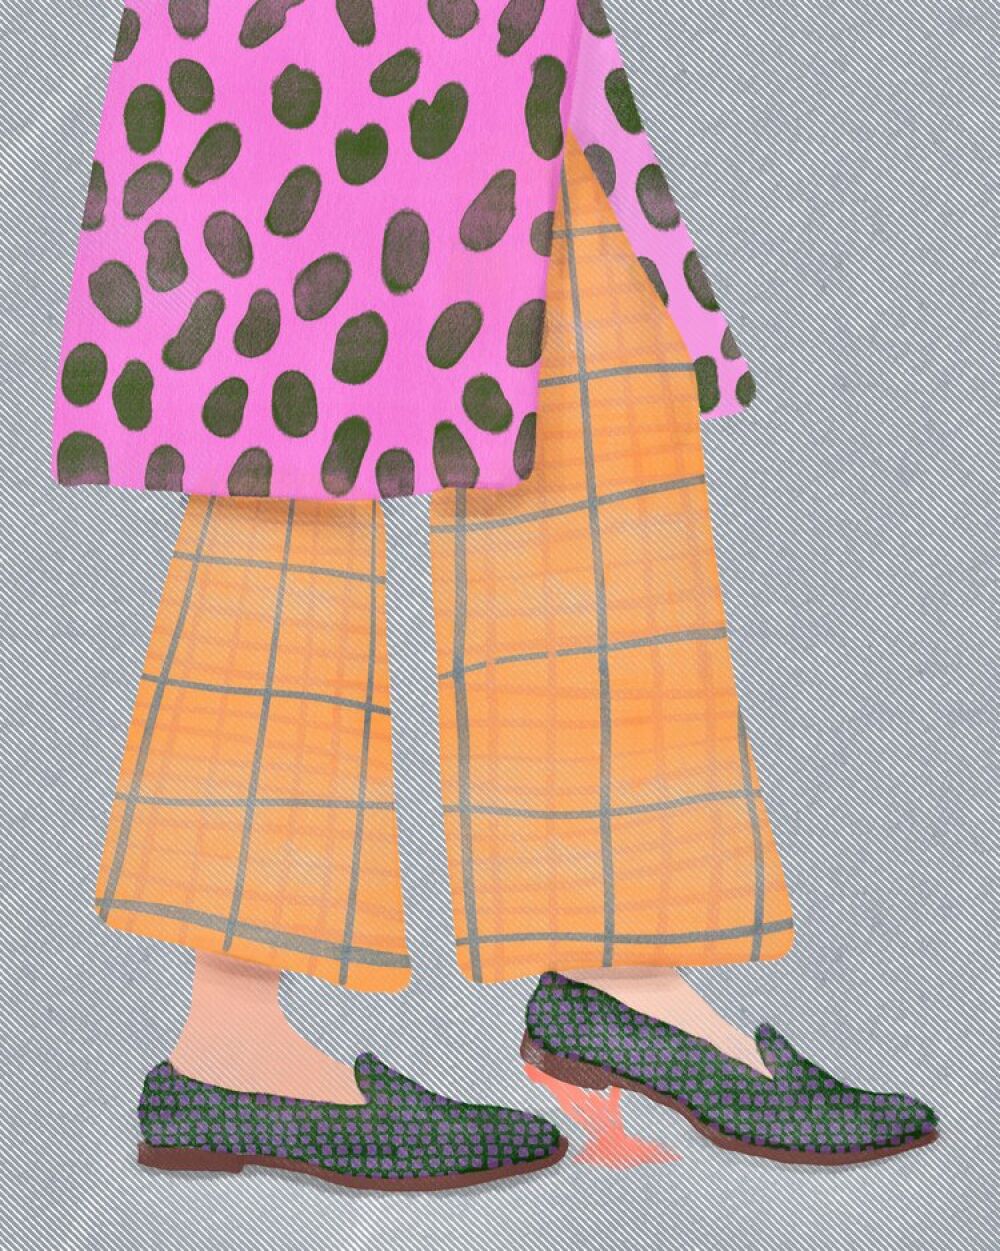 Flat graphic fashion and beauty illustration by the artist Christina Gliha 